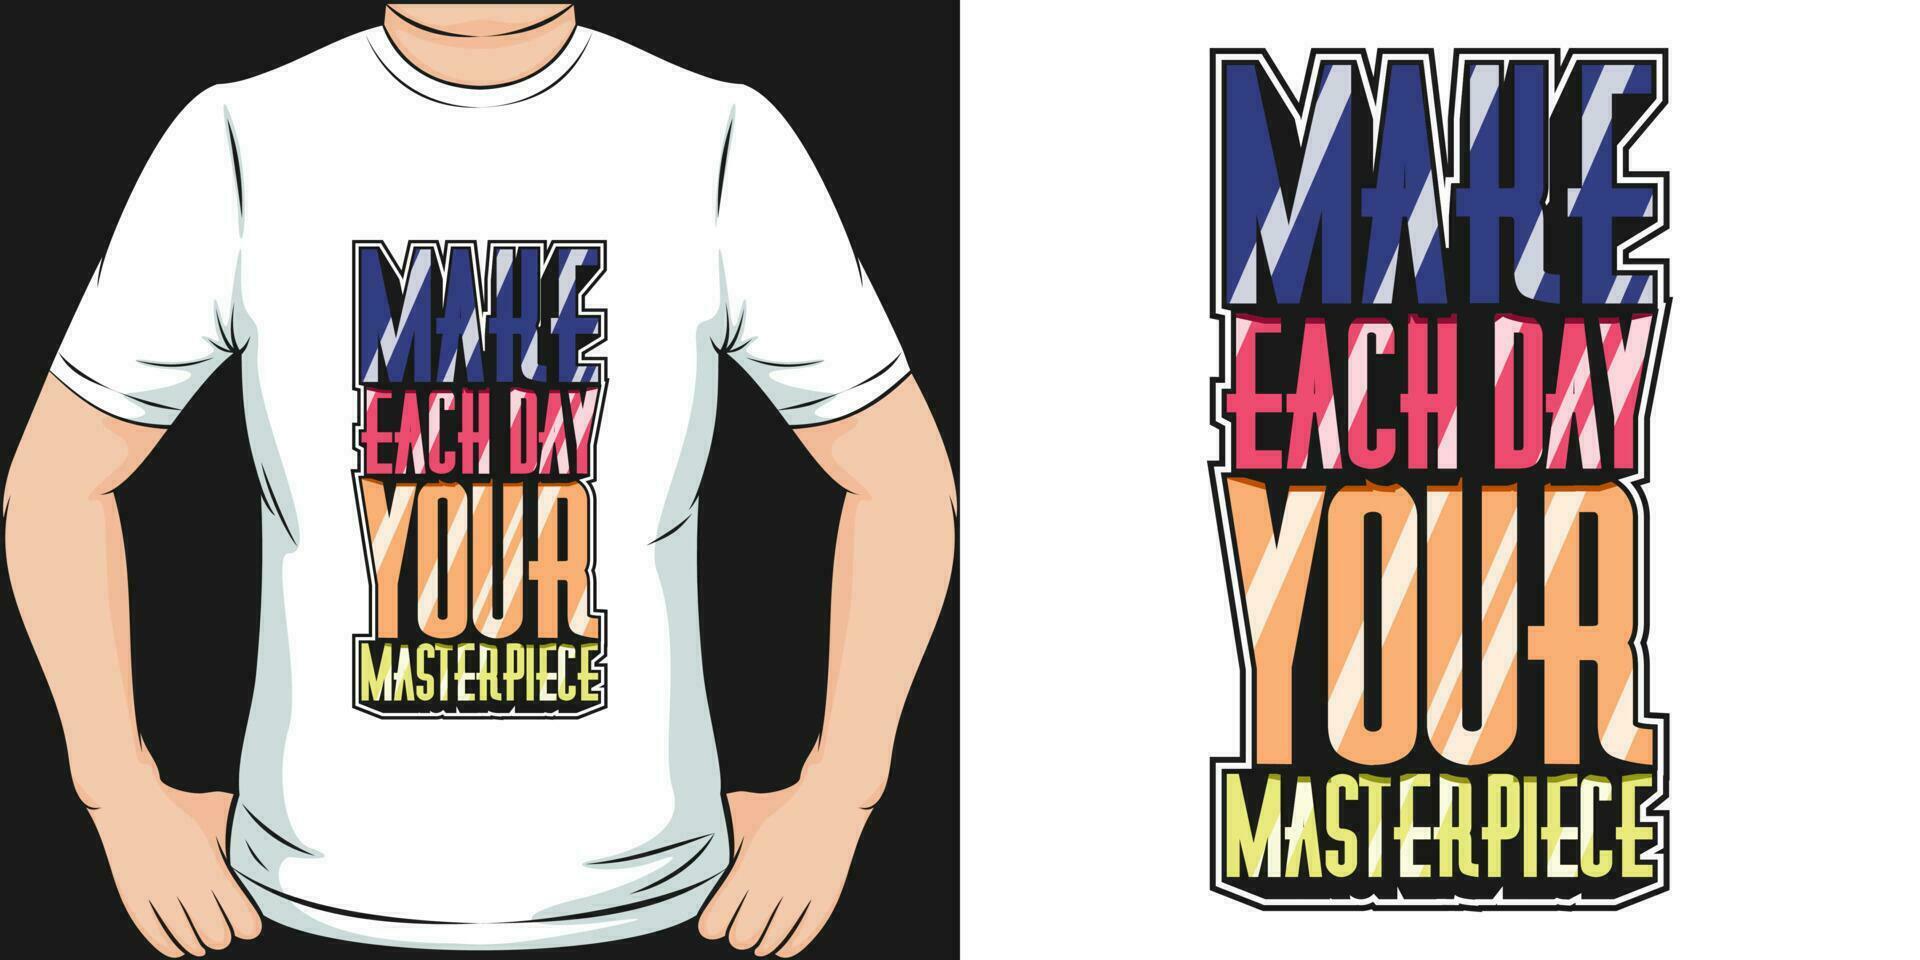 Make Each Day Your Masterpiece, Motivational Quote T-Shirt Design. vector